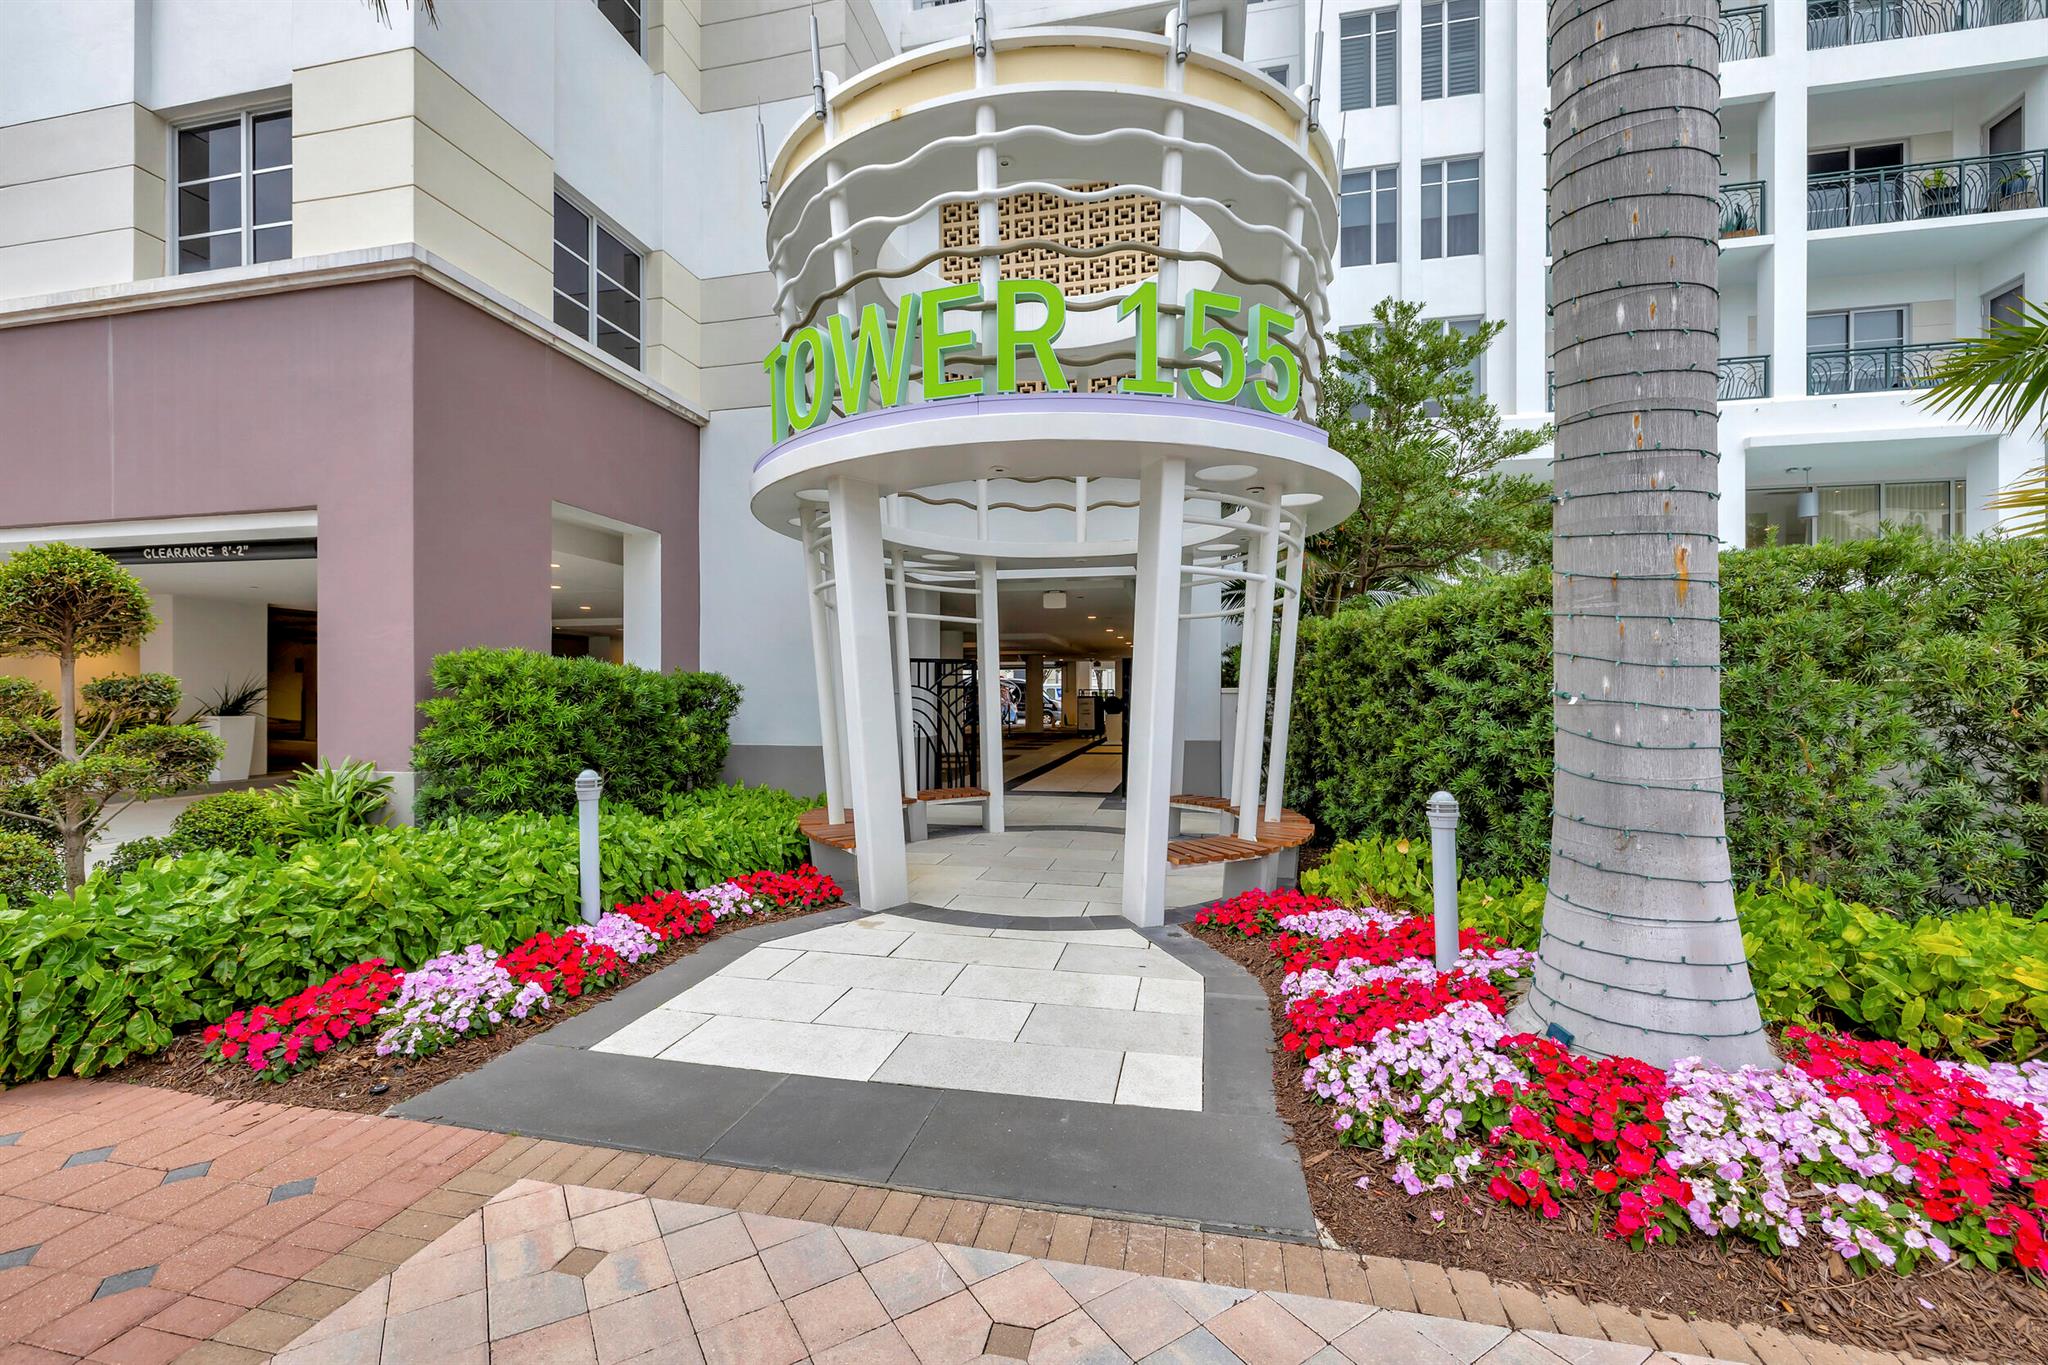 If you have been searching for new ultra-luxury living in downtown Boca with direct ocean views from this corner unit, Tower 155 is the place for you. This incredible condo is a double unit and boasts over 2600 sq. ft. with 3 beds, 3.5 bathrooms, 10 foot ceilings, porcelain tile floors and hurricane resistant glass windows and doors can be found throughout. The kitchen is open to the living room with exquisite European style cabinetry, quartz countertops, Modena Island Hood and Bosch stainless steel appliances. All bathrooms contain frameless glass showers, Kohler toilets and tubs with porcelain flooring. Tower 155 luxurious amenities include a sundeck that overlooks Mizner Park with chaise loungers, a hot tub, wading pool and private cabanas. Stay in shape on the rooftop or